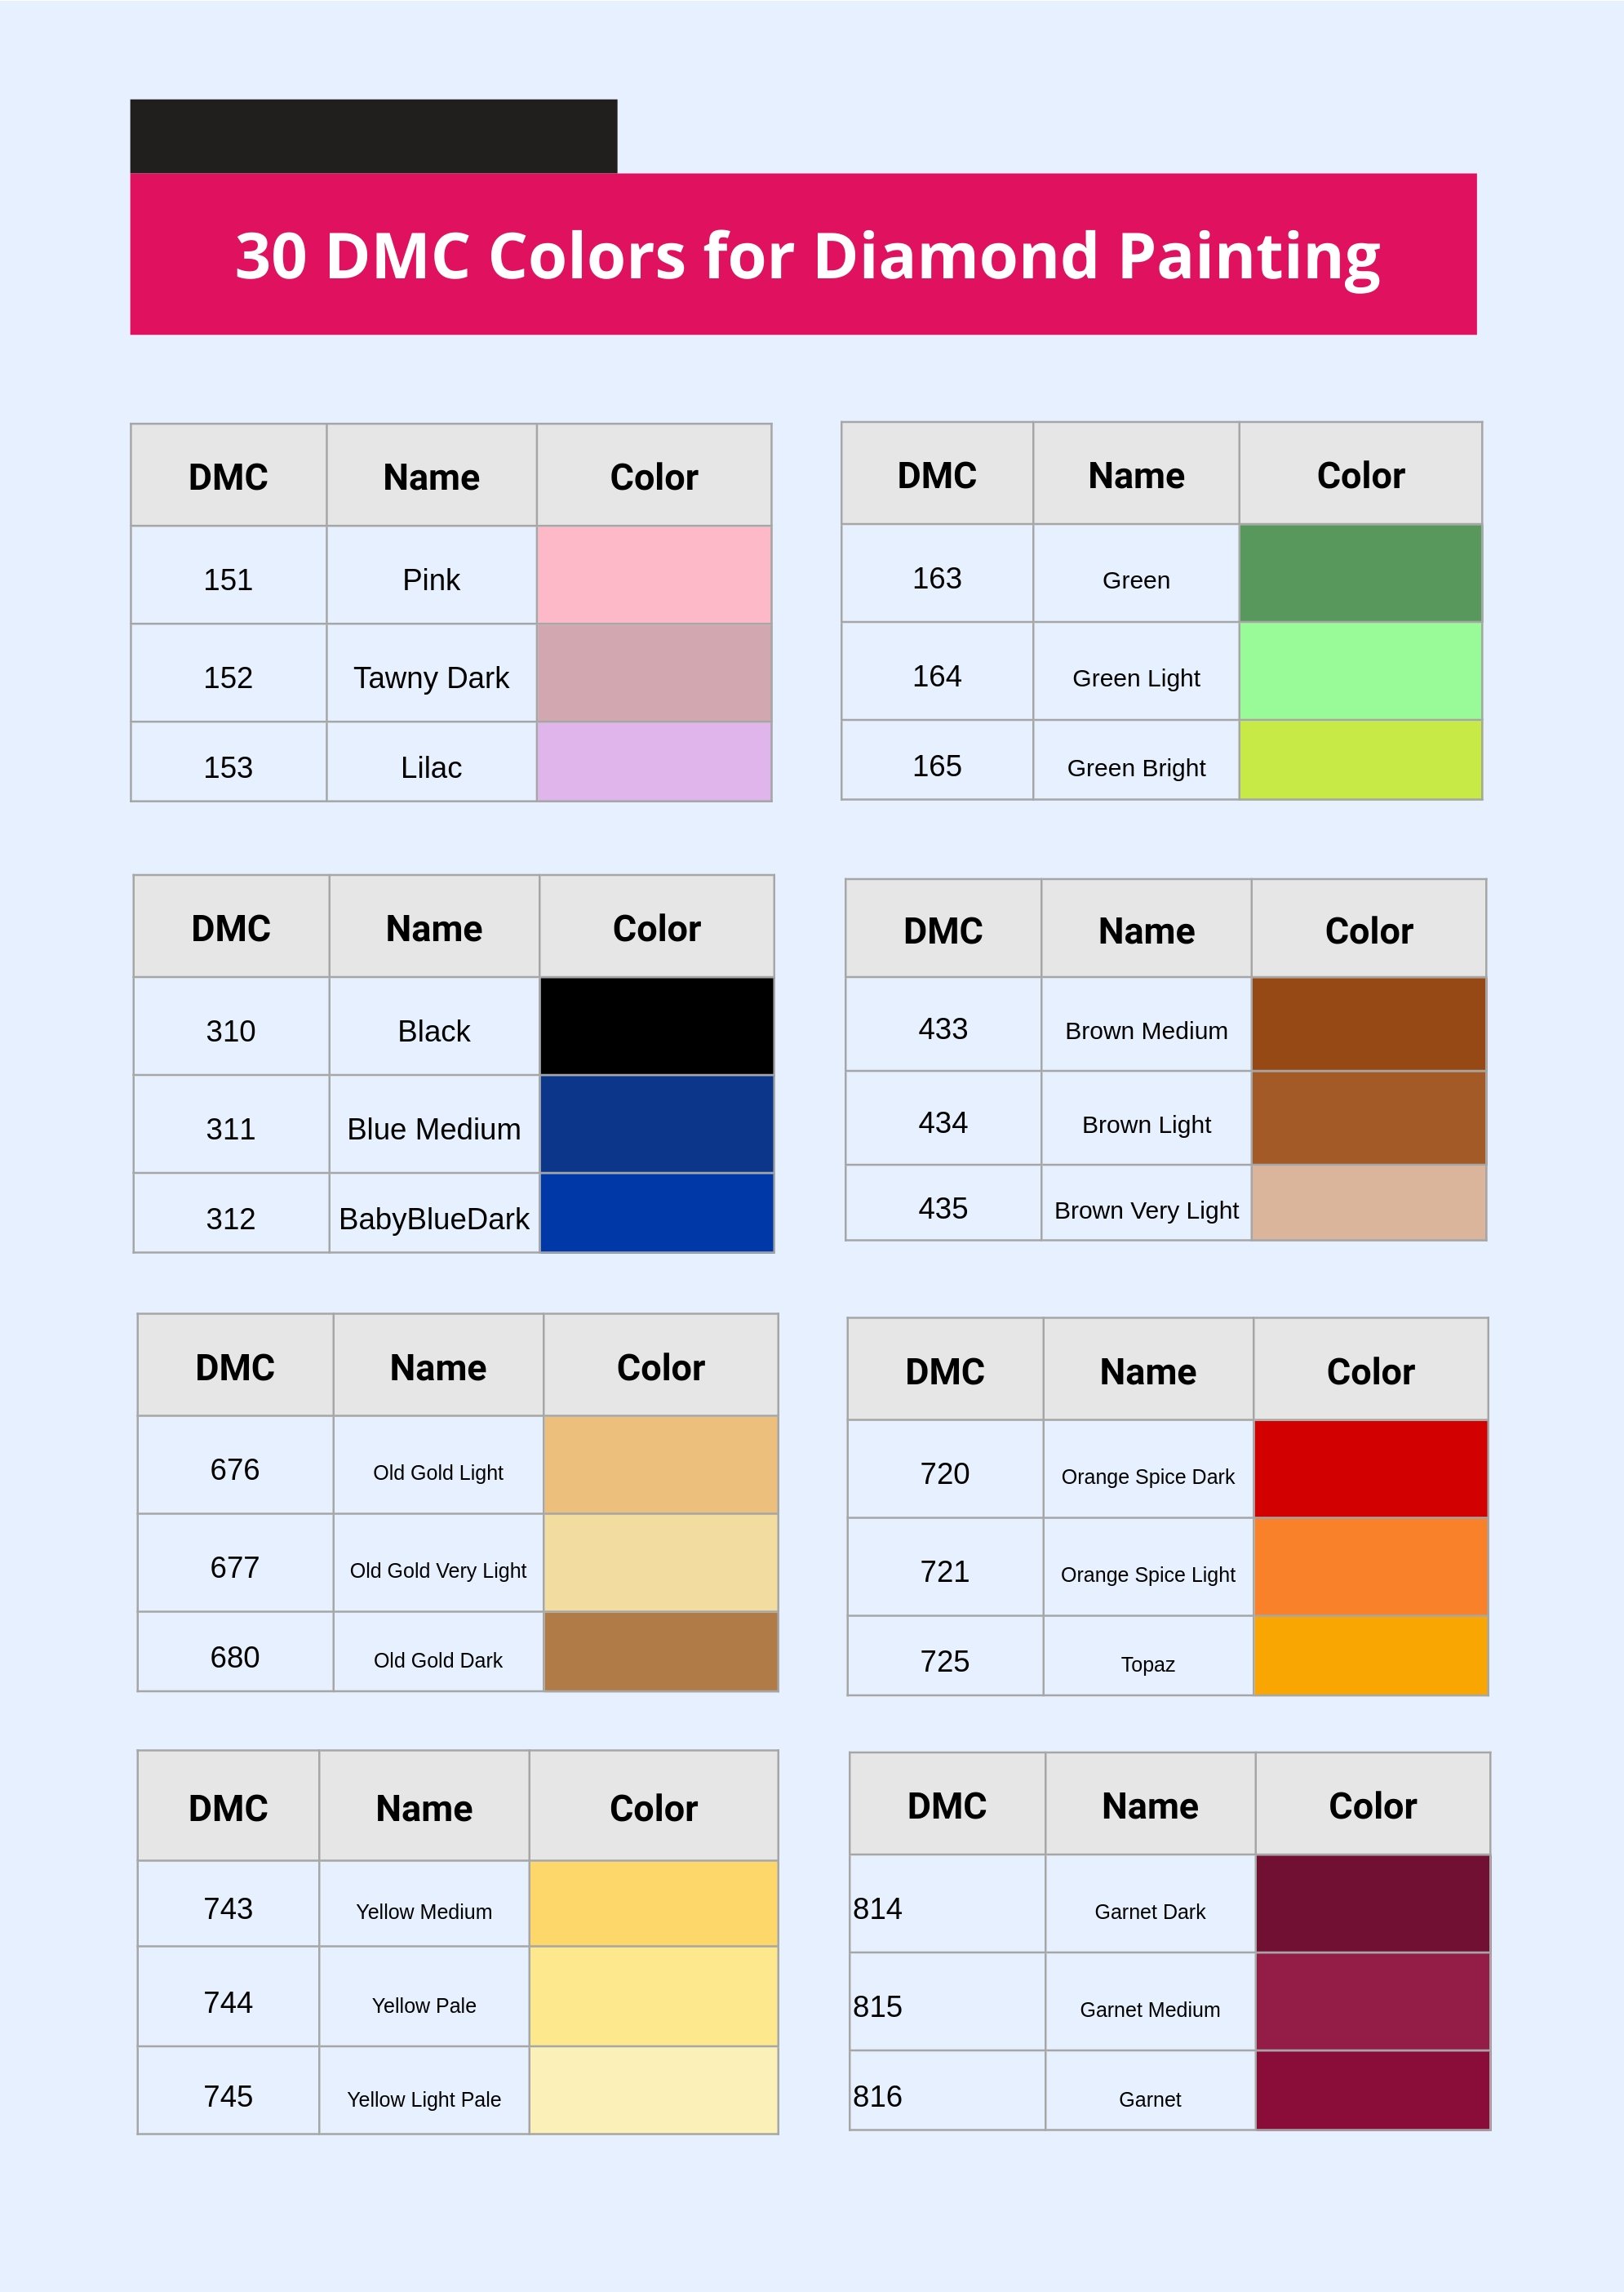 Free Diamond Painting DMC Color Chart - Download in PDF